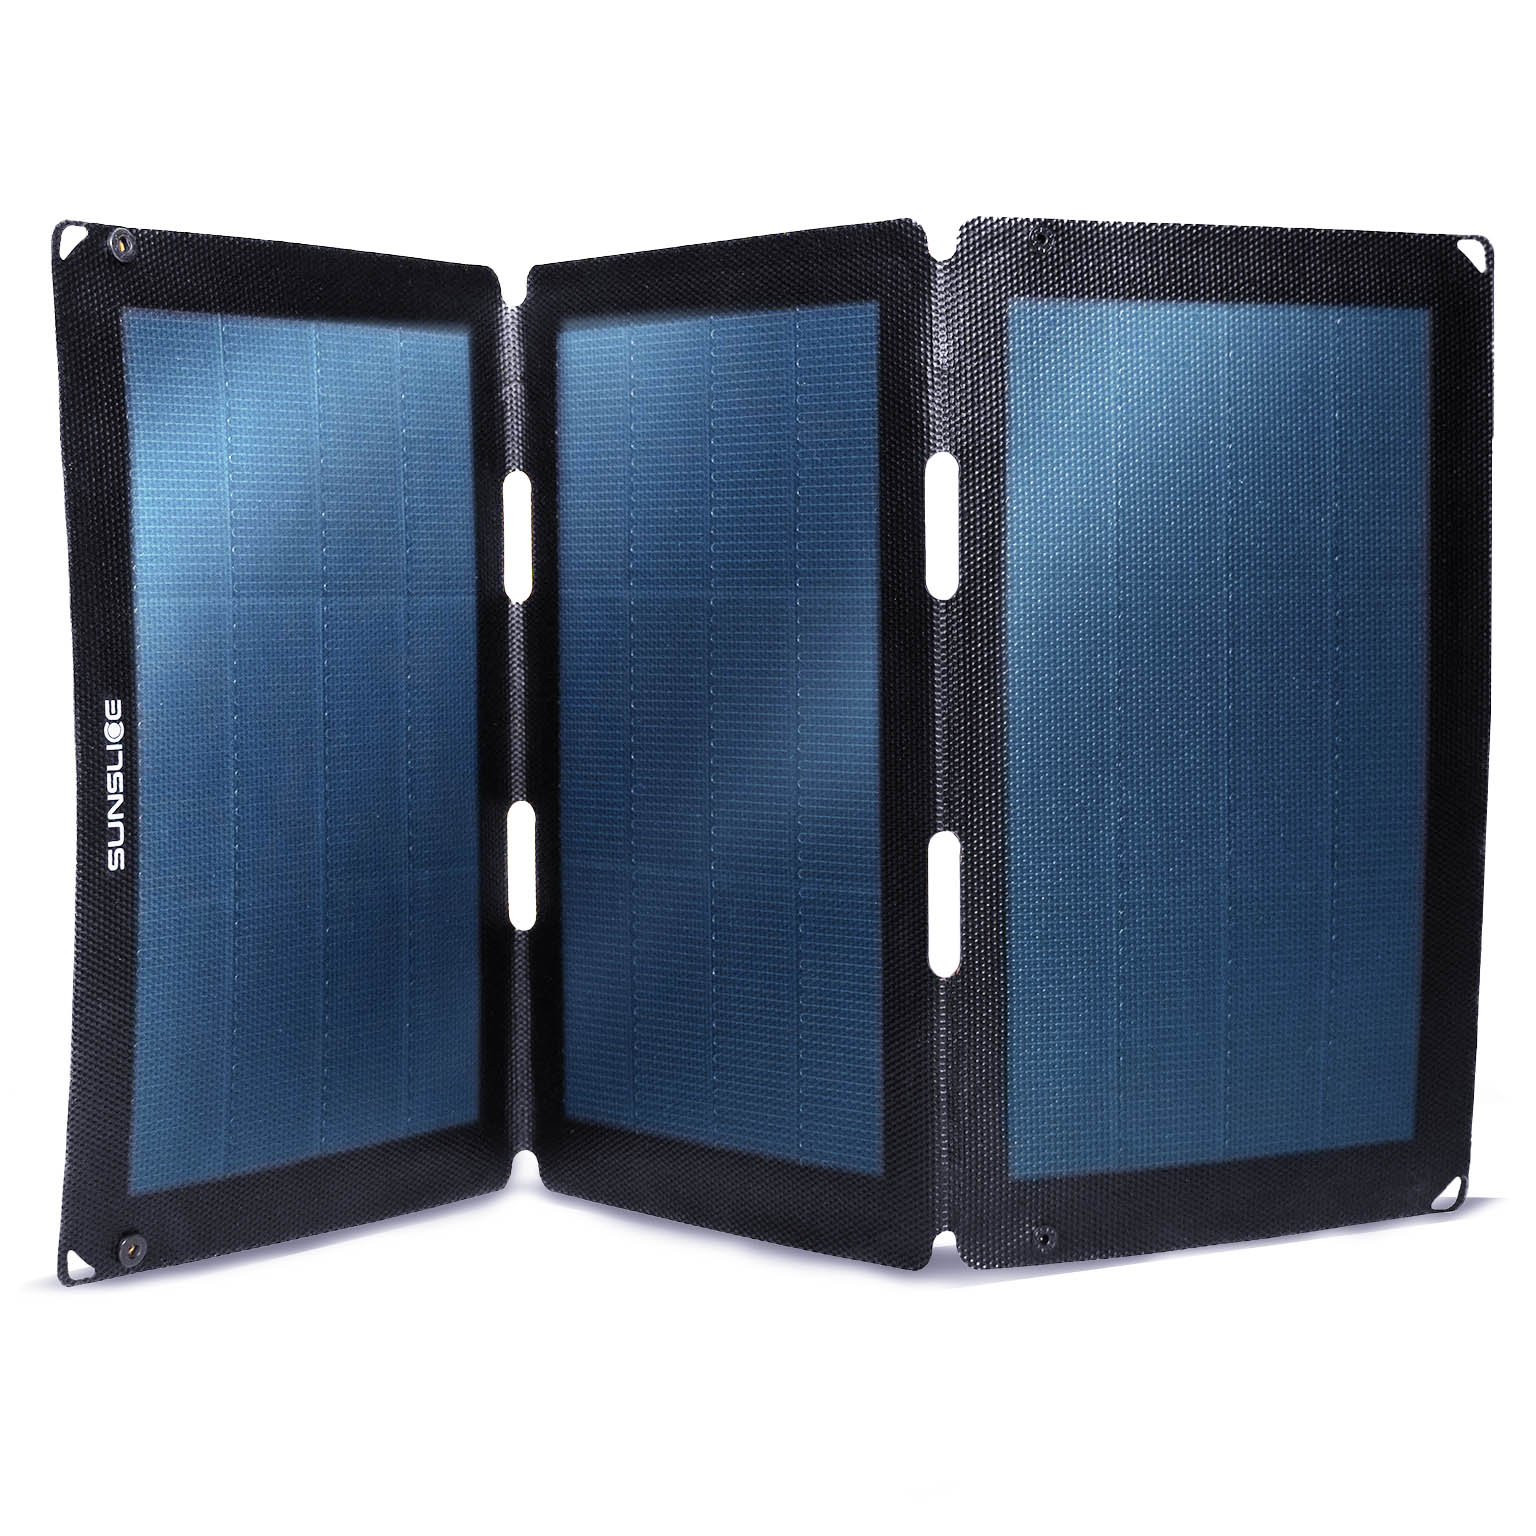 powerful solar charger fusion flex24 on white background